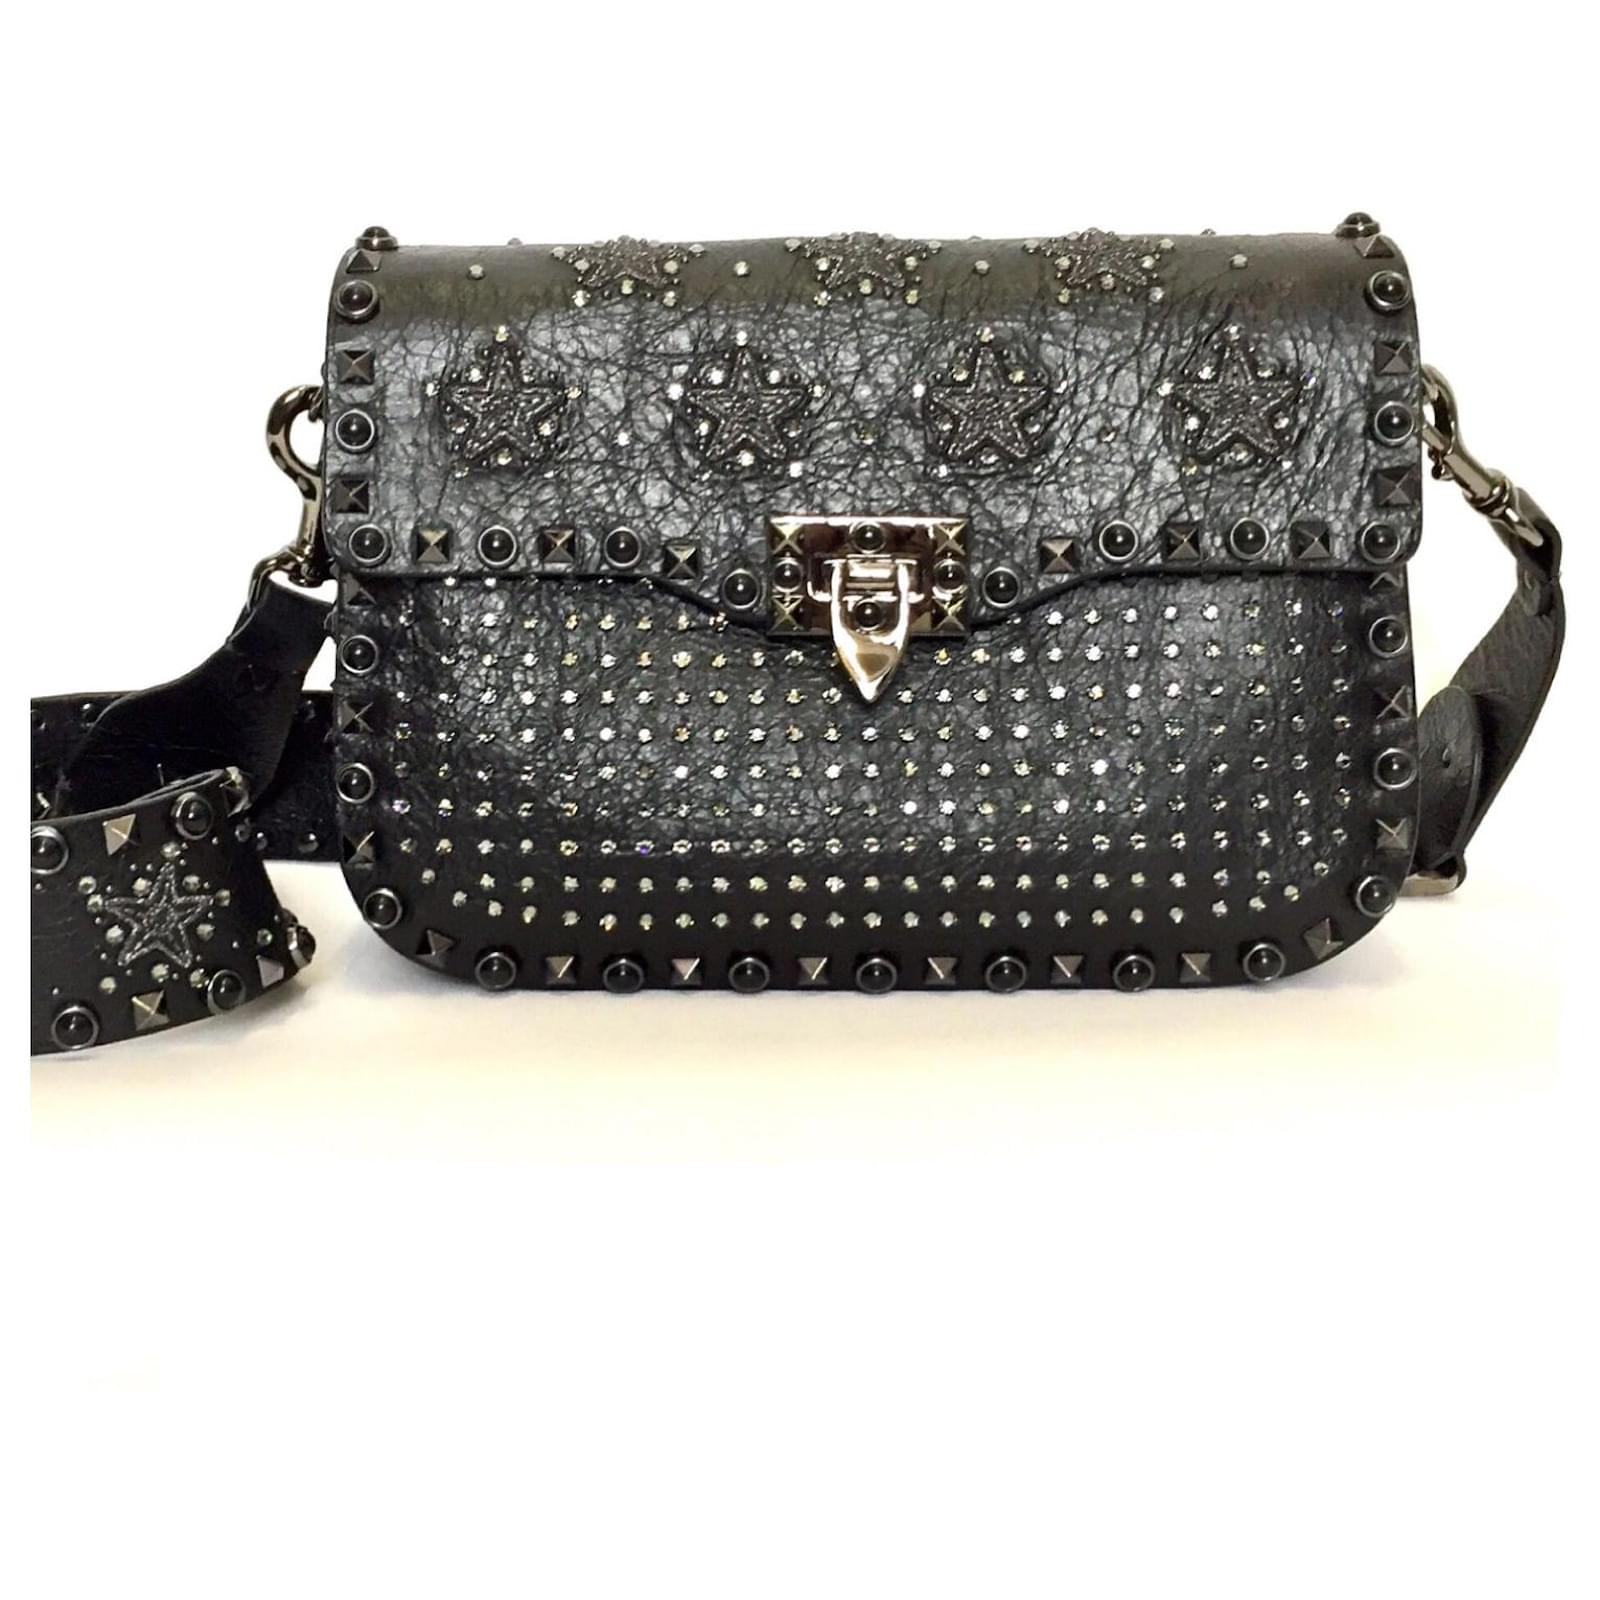 Valentino Noir Rockstud bag in black leather with crystals - Closet